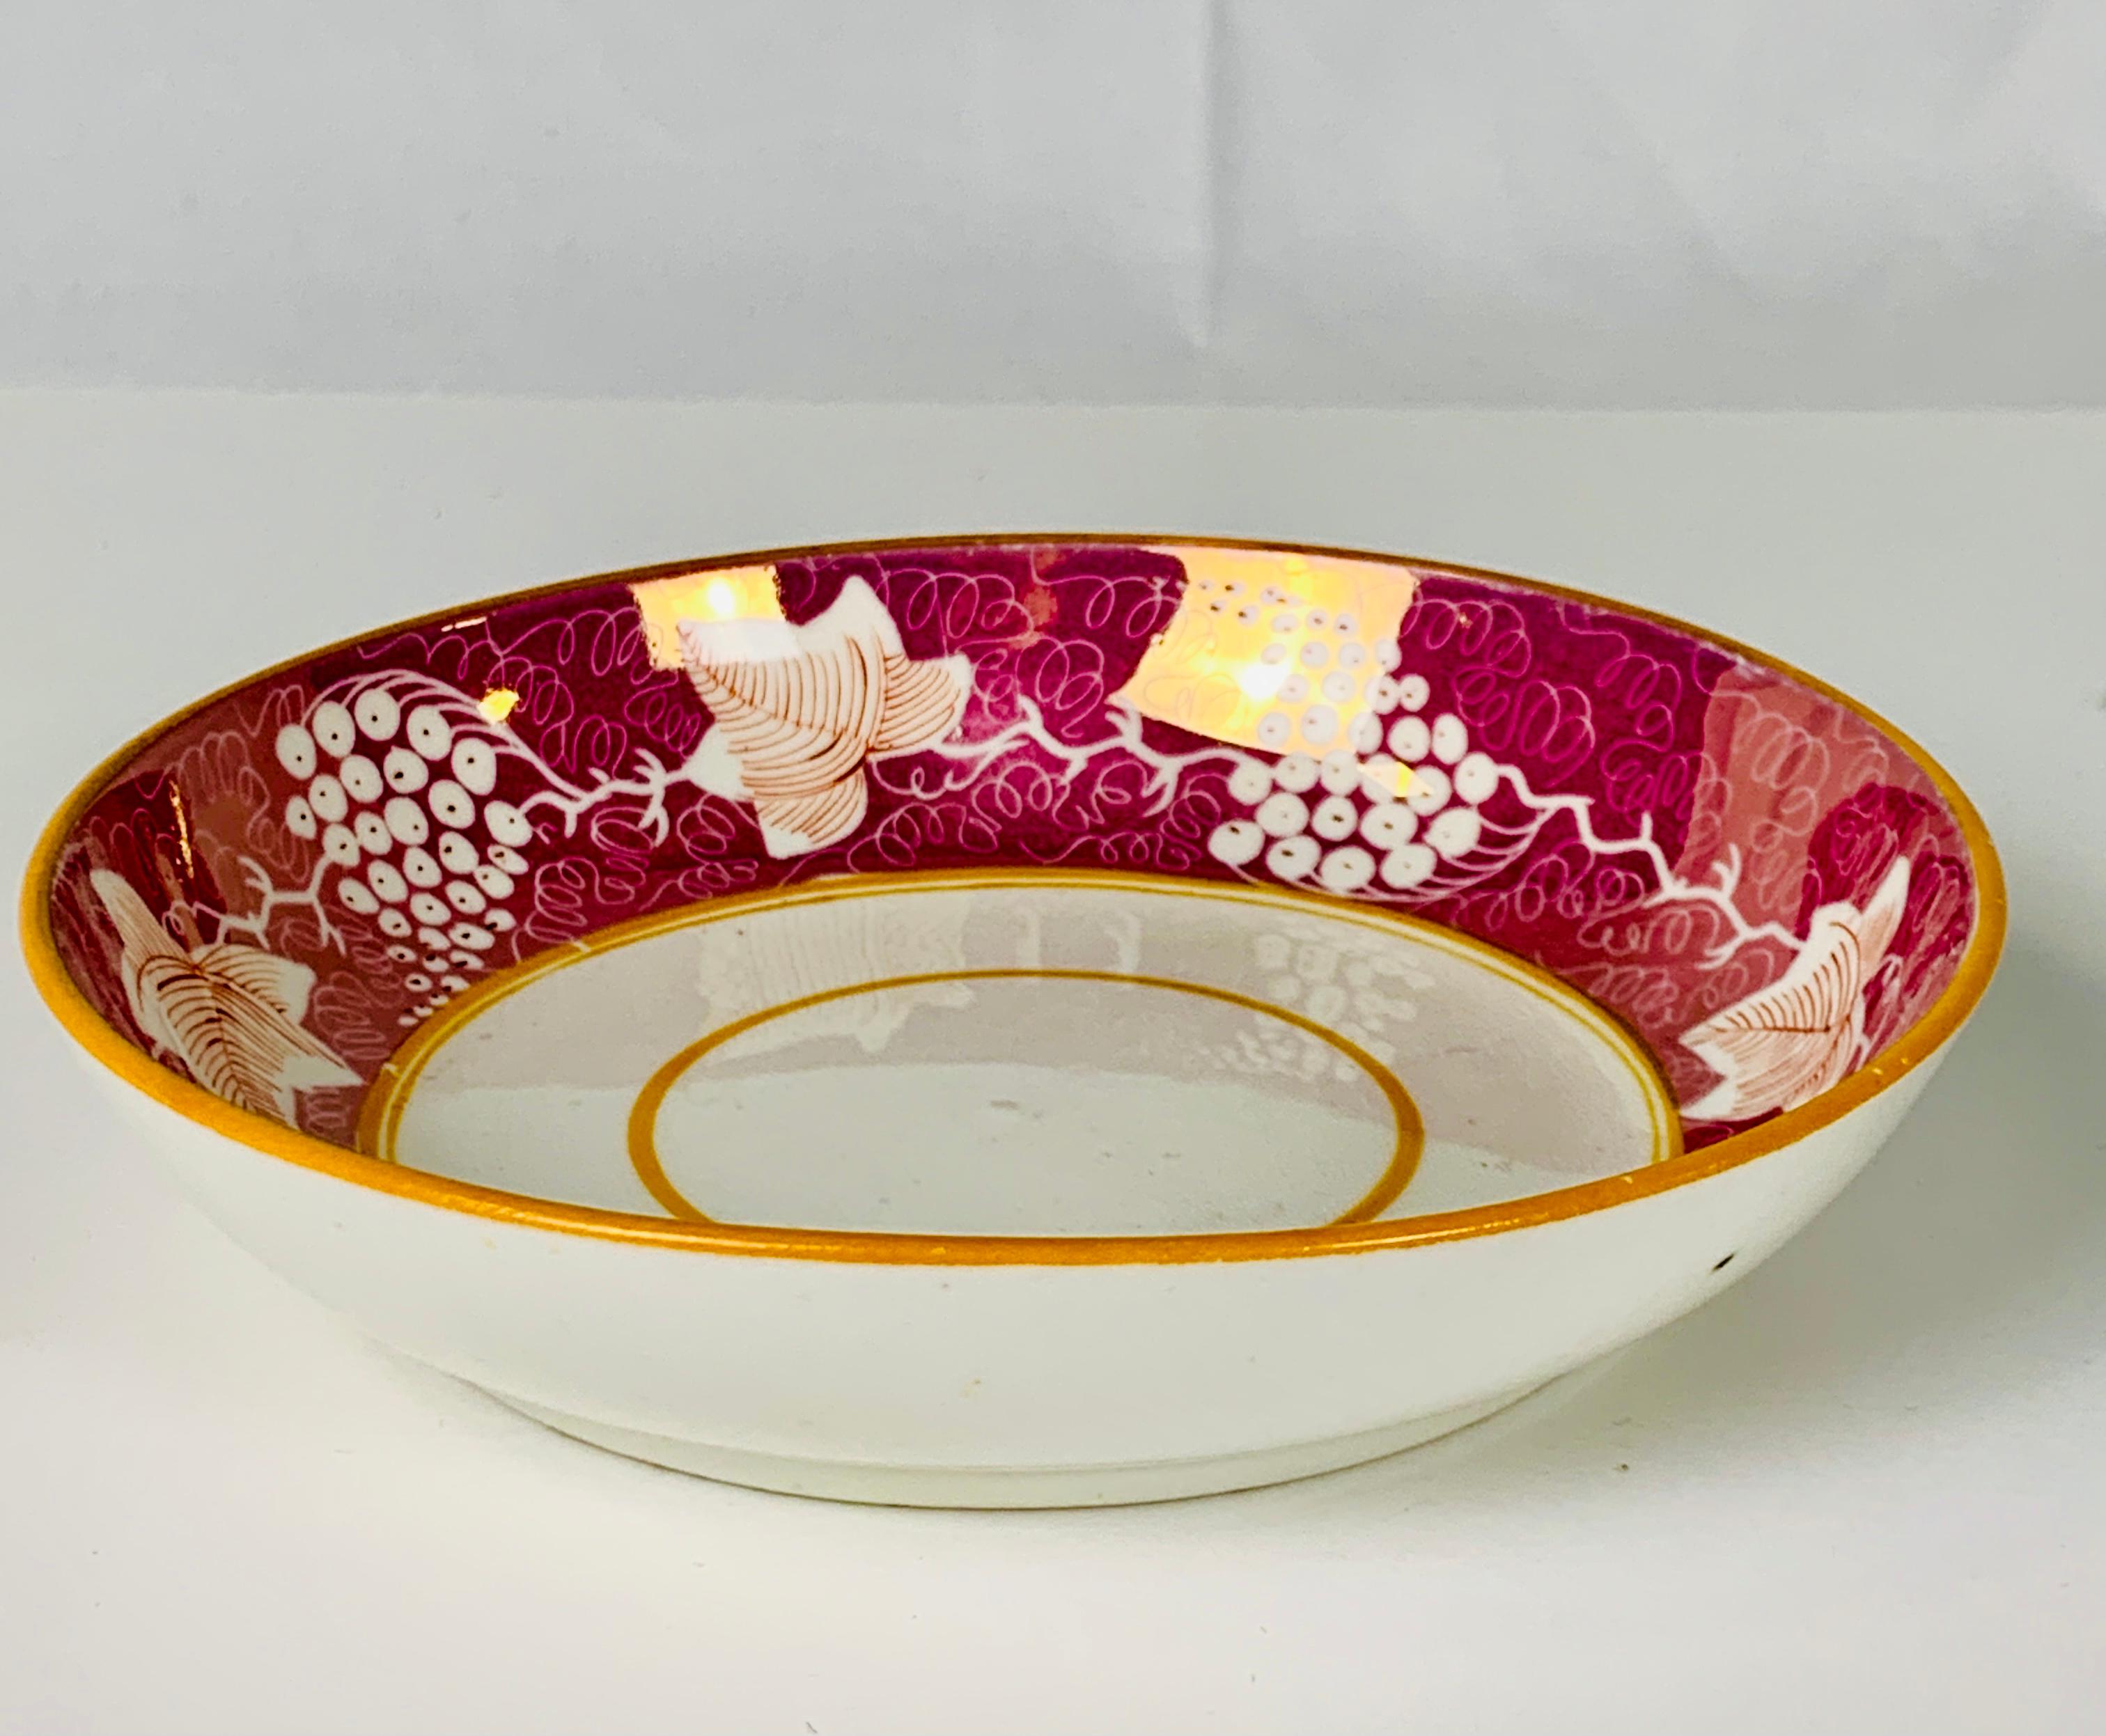 The Collection of Mario Buatta Pink Lustre Porcelain Saucer Made England c- 1830 1